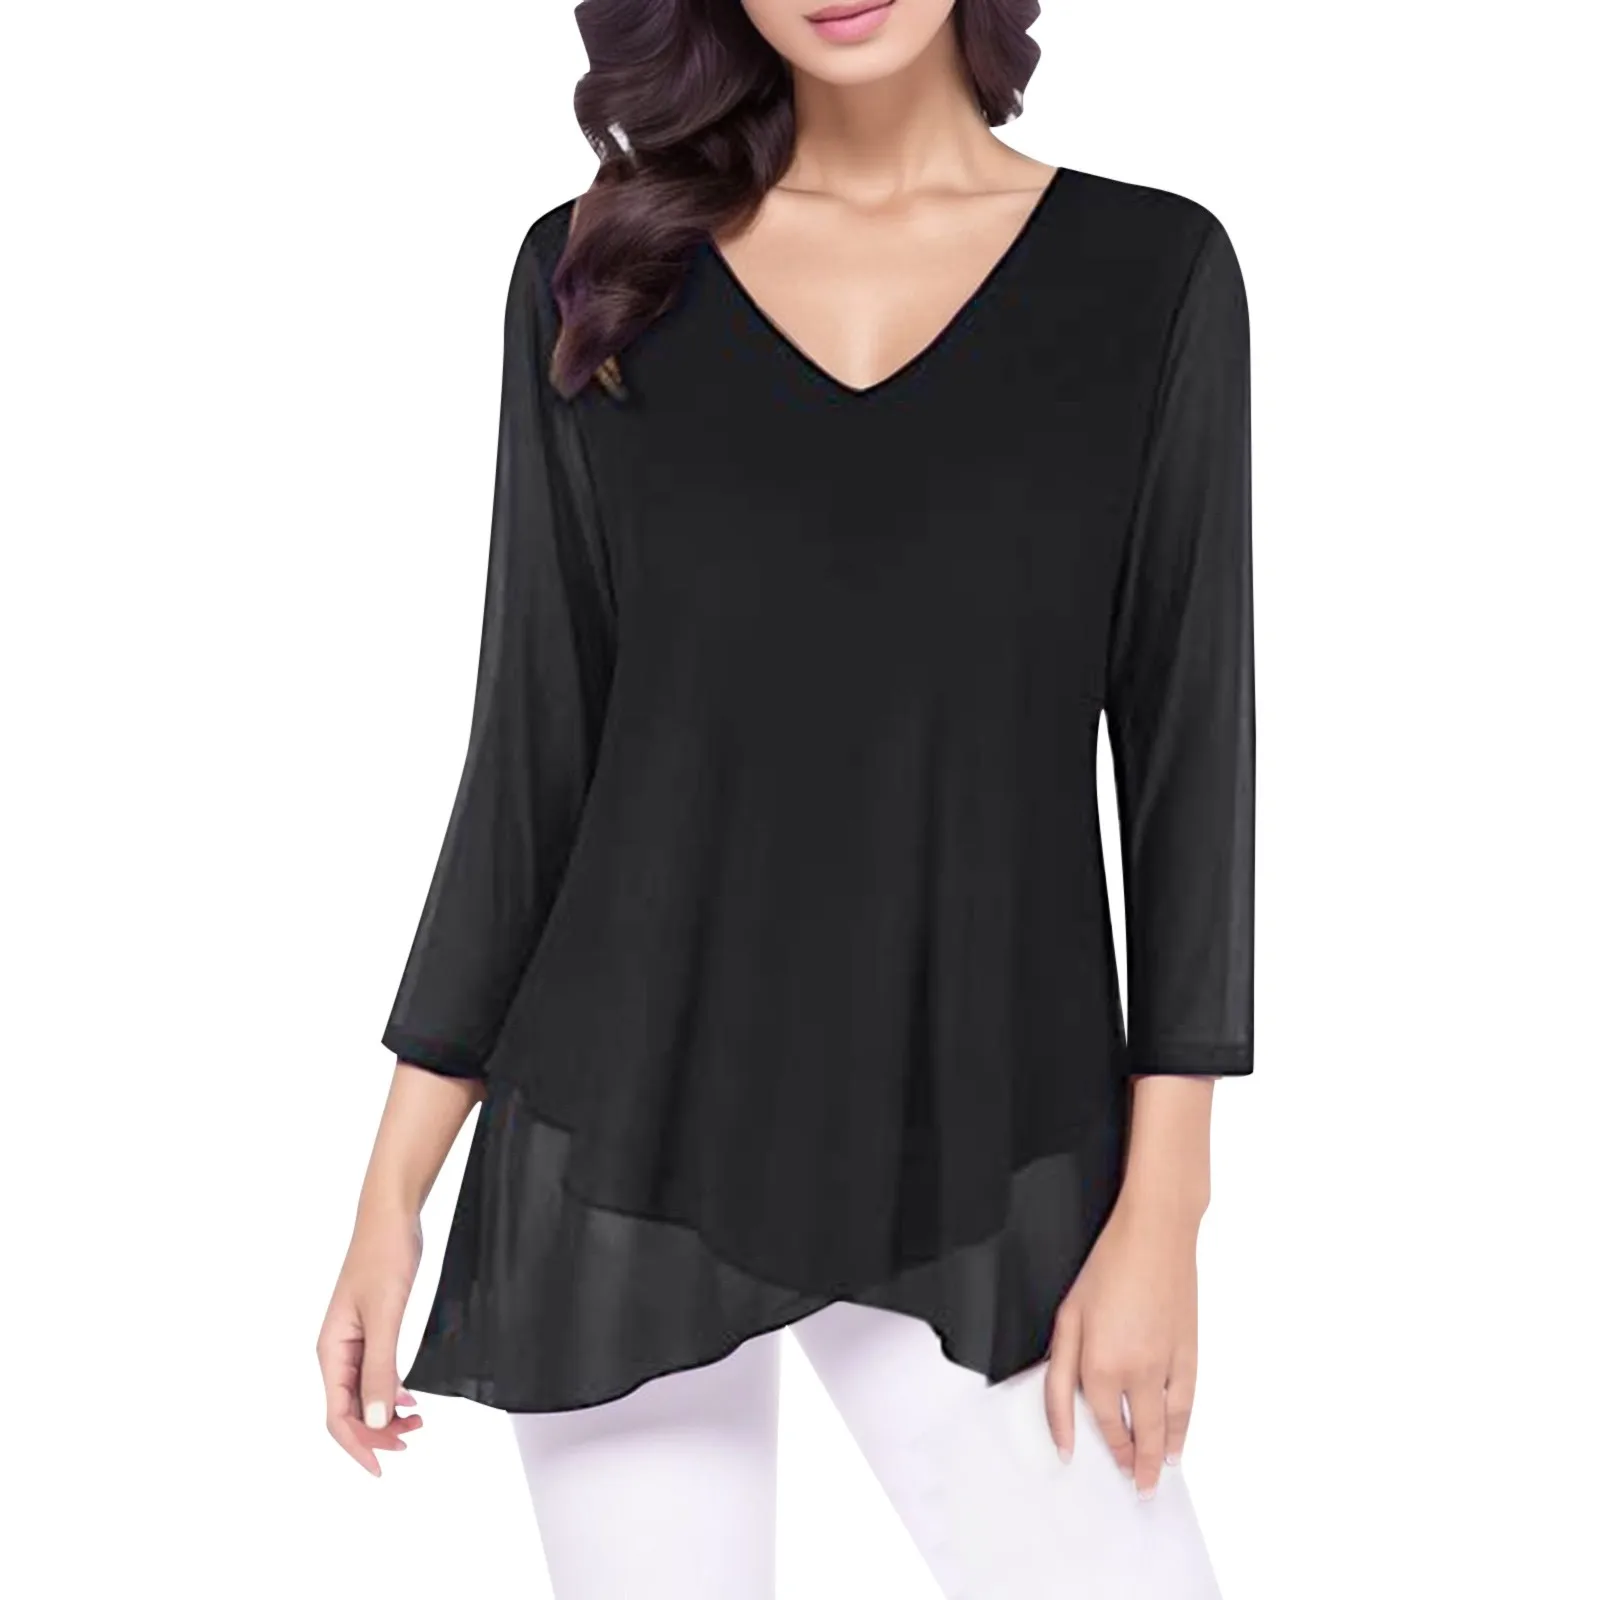 

Solid Color V Neck Shirts For Women Asymmetric Hem 3/4 Sleeve Blouses Basic Lightweight Mesh Comfy Tunic Tops And Blouse Blusas